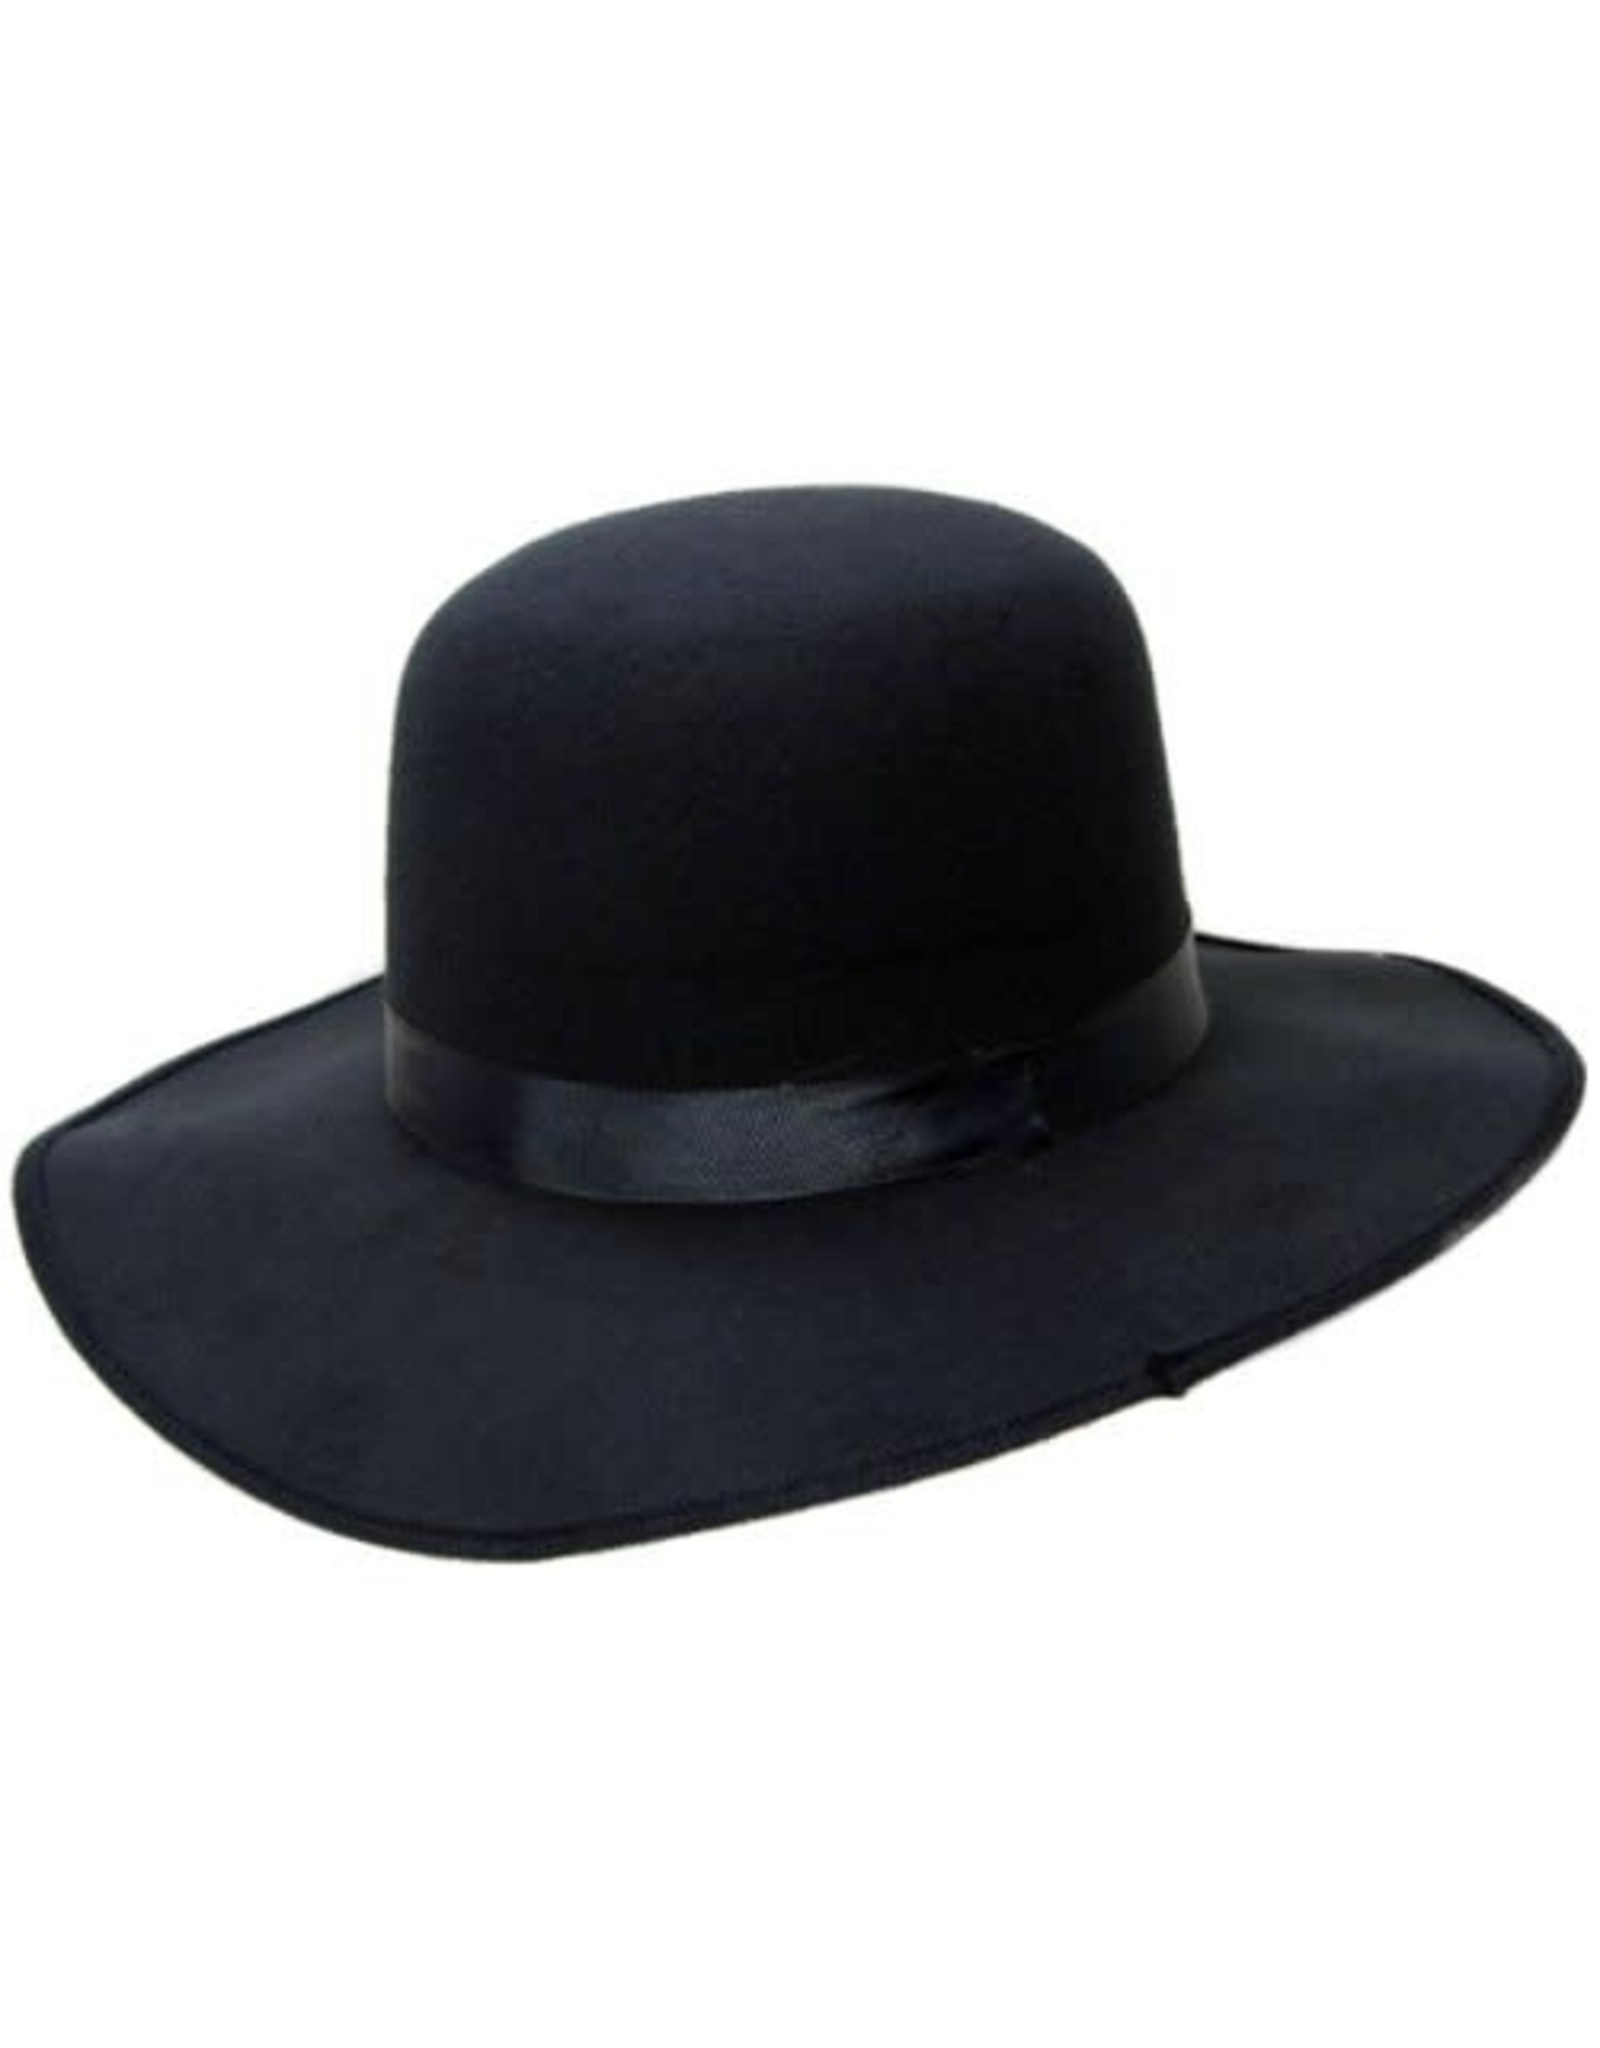 Jacobson Hat Co. Black Hats With Black Bow, Black, 24241Bkao